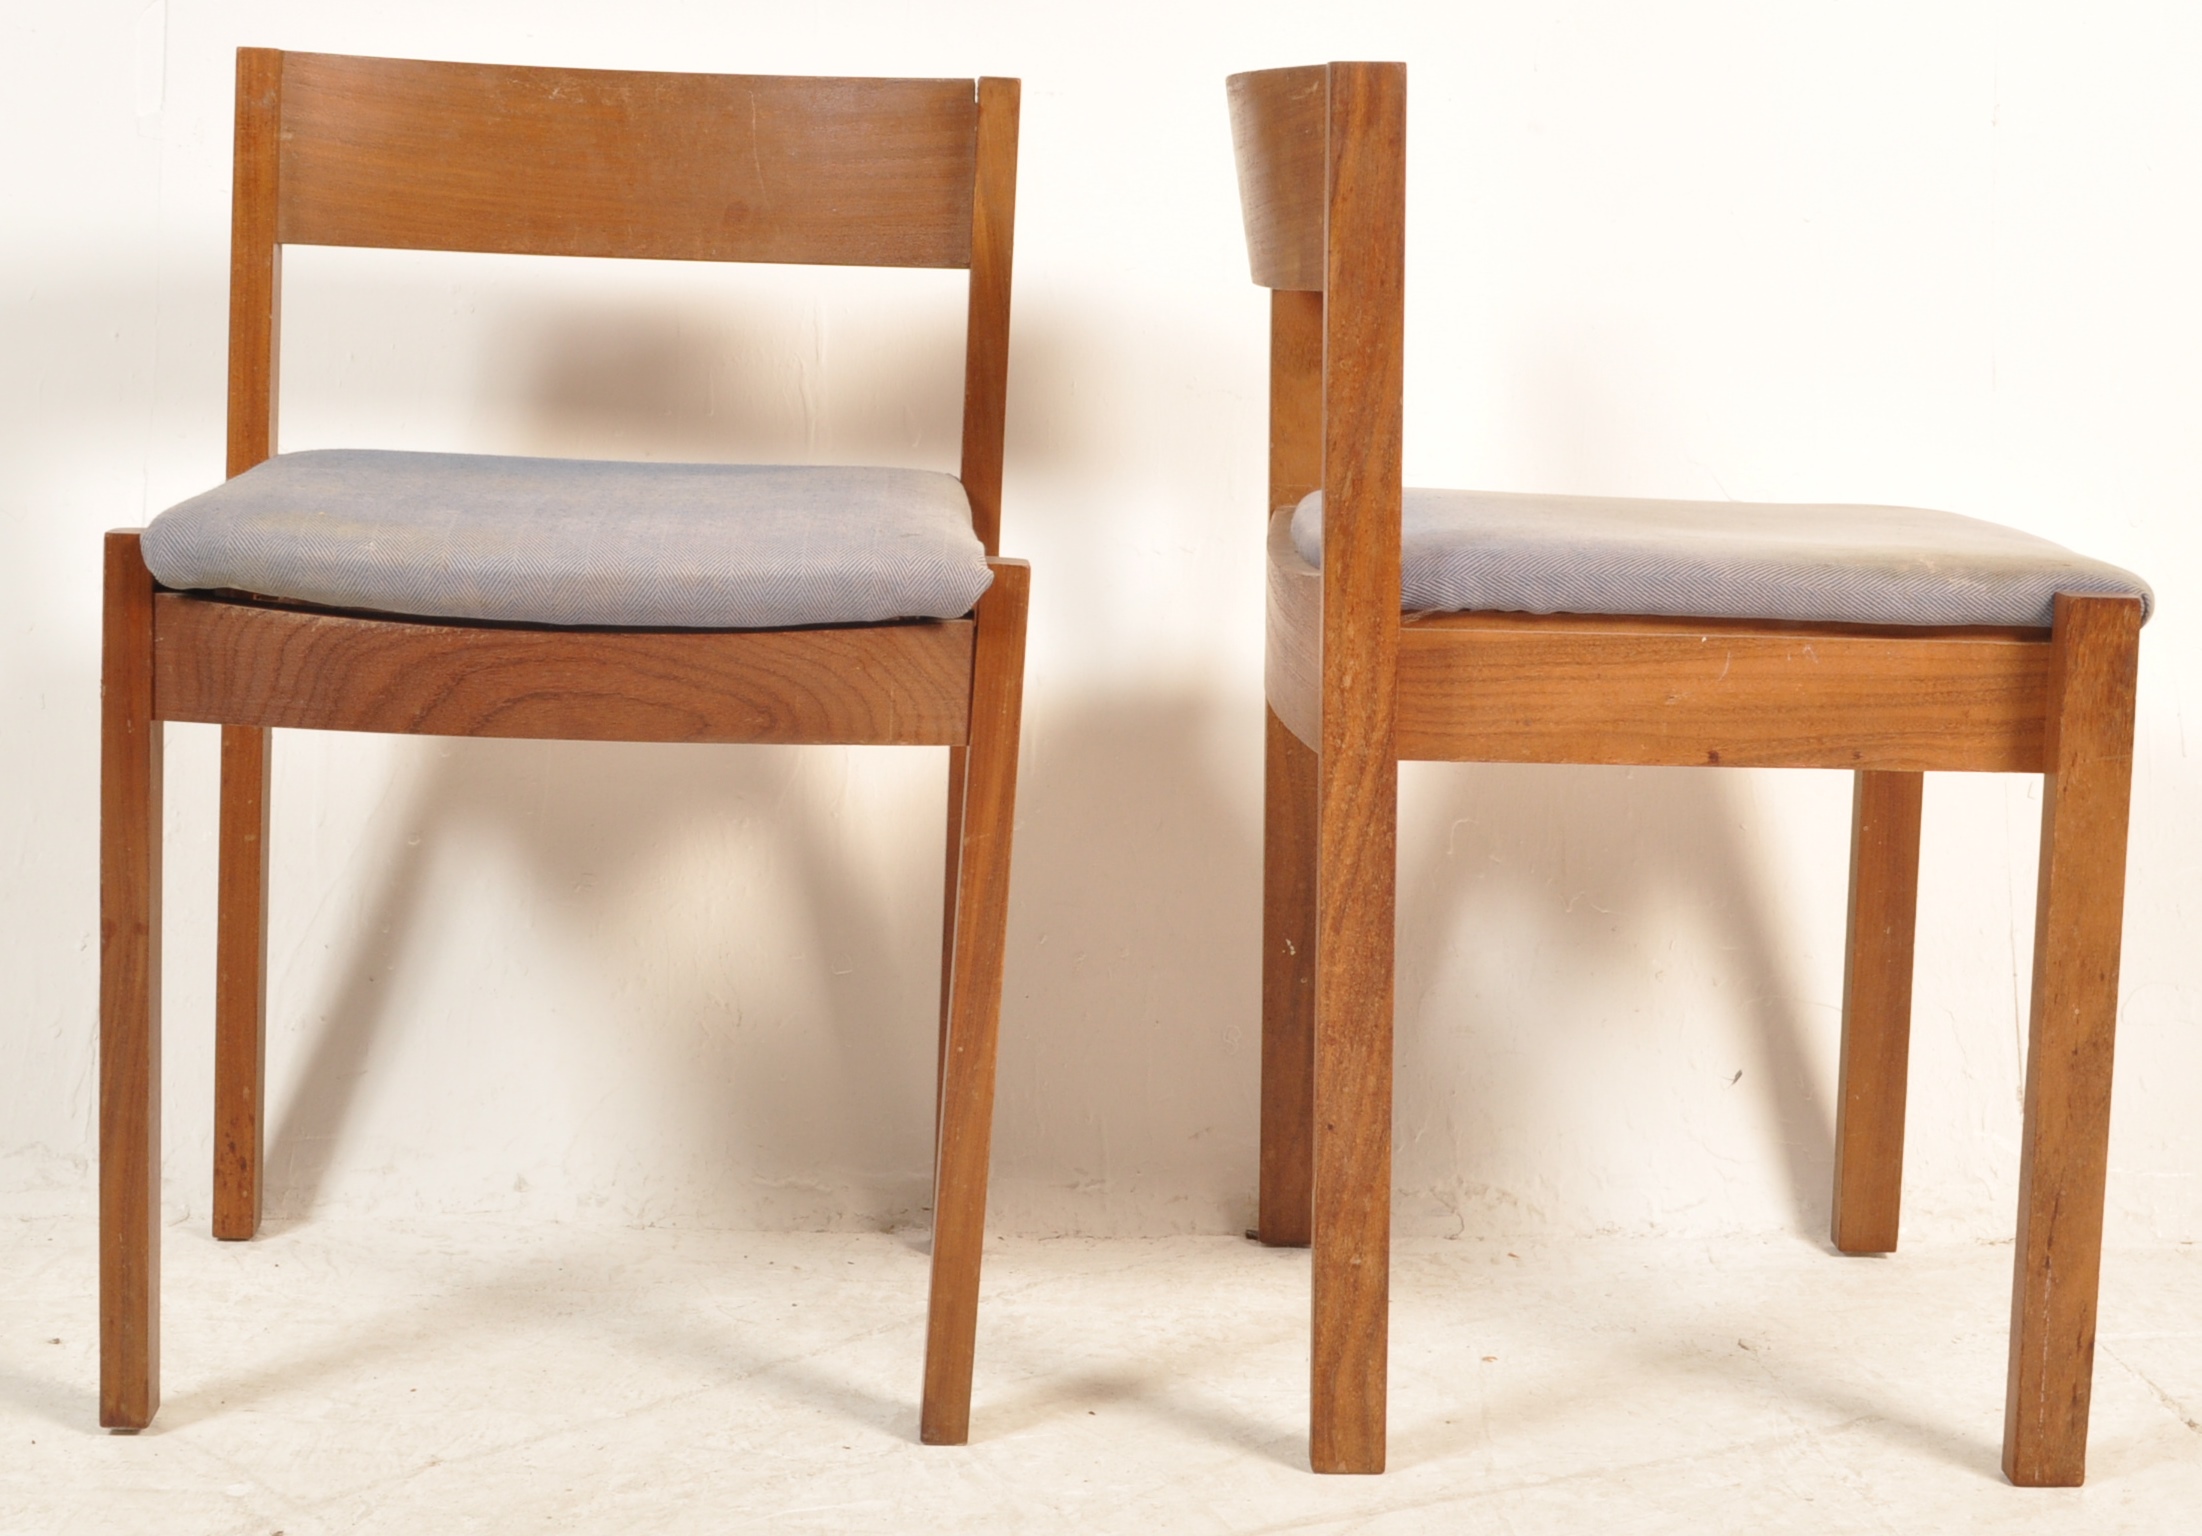 MEREDEW - BRITISH MODERN DESIGN - RETRO VINTAGE TABLE AND CHAIRS - Image 7 of 8